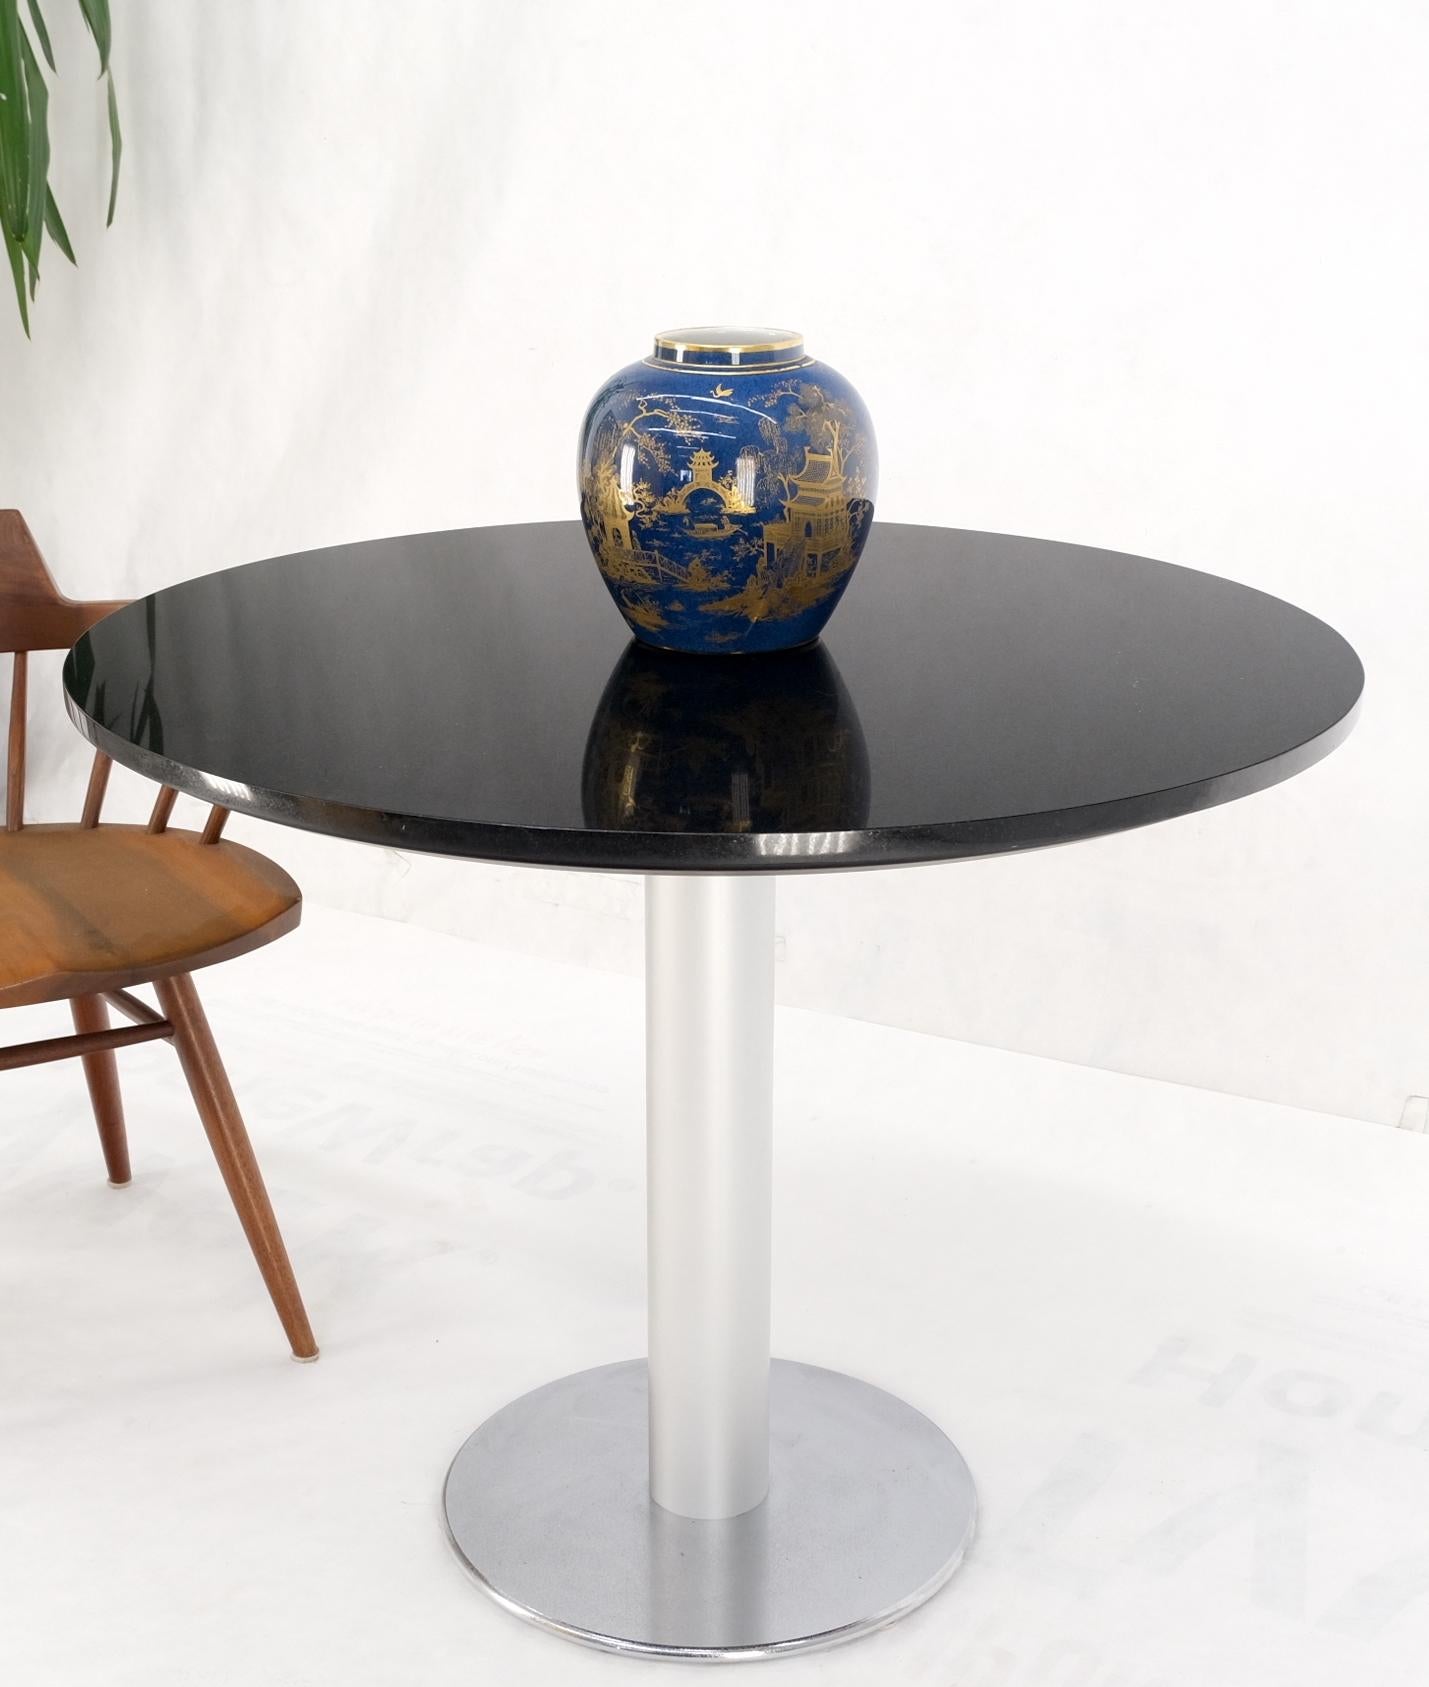 Black Granite Top Crome Pedestal Base Round Dining Table Mid Century Modern MINT For Sale 6